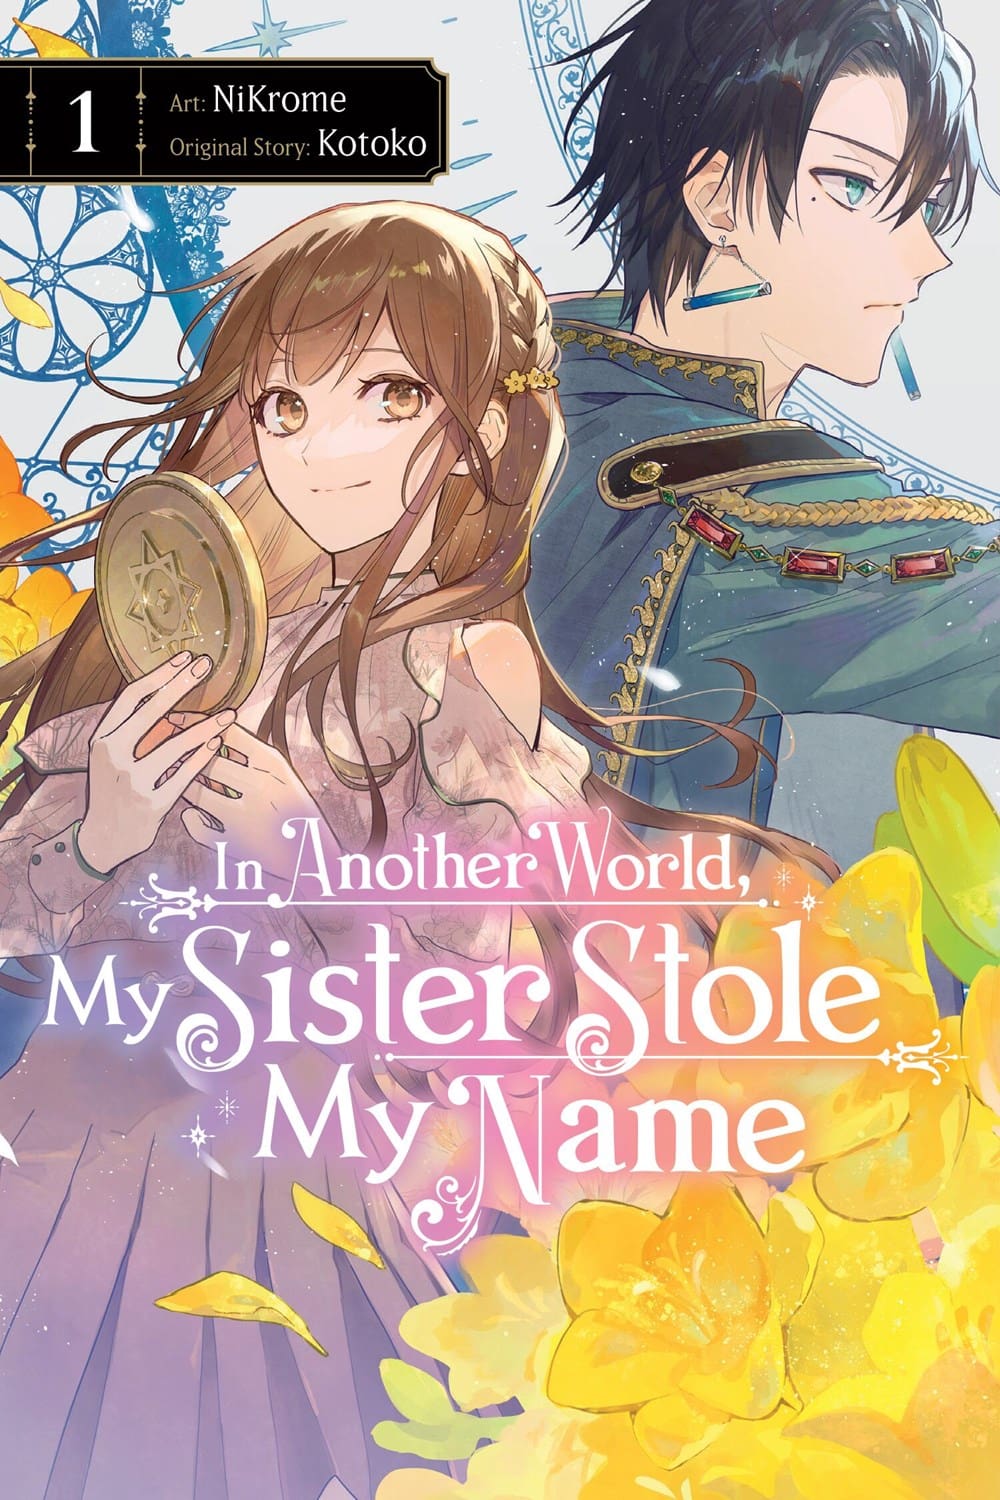 In Another World, My Sister Stole My Name